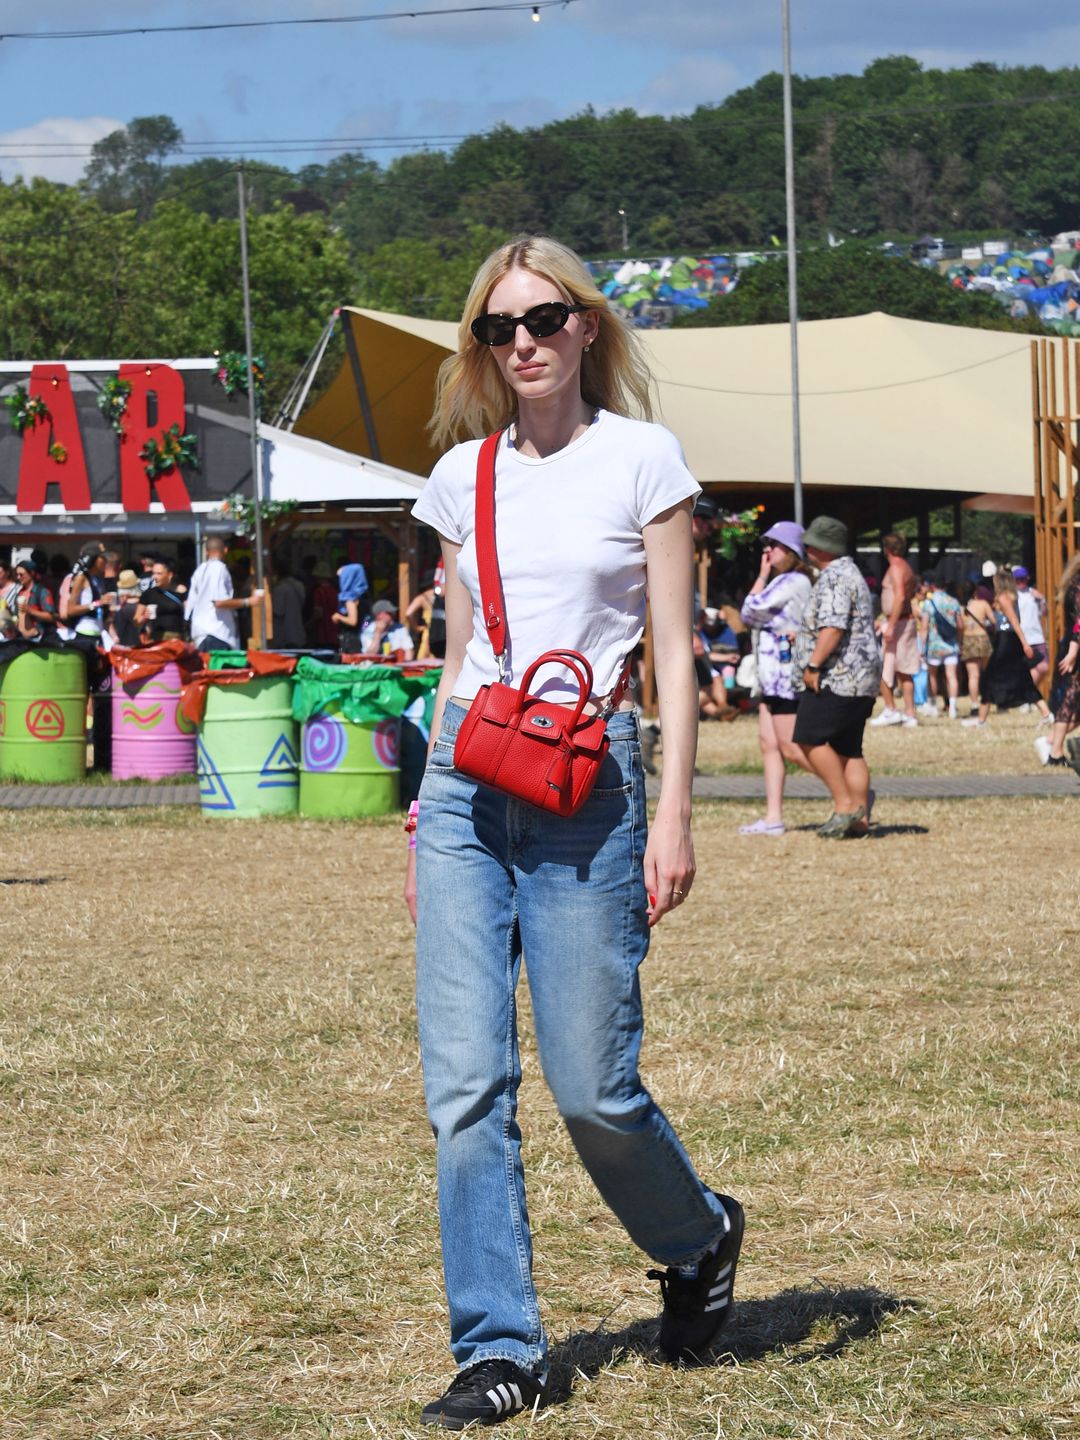 GLASTONBURY, ENGLAND - JUNE 24: Ella Richards attends day four of the Glastonbury Festival on June 24, 2023 in Glastonbury, England. (Photo by Mark Boland/Getty Images)